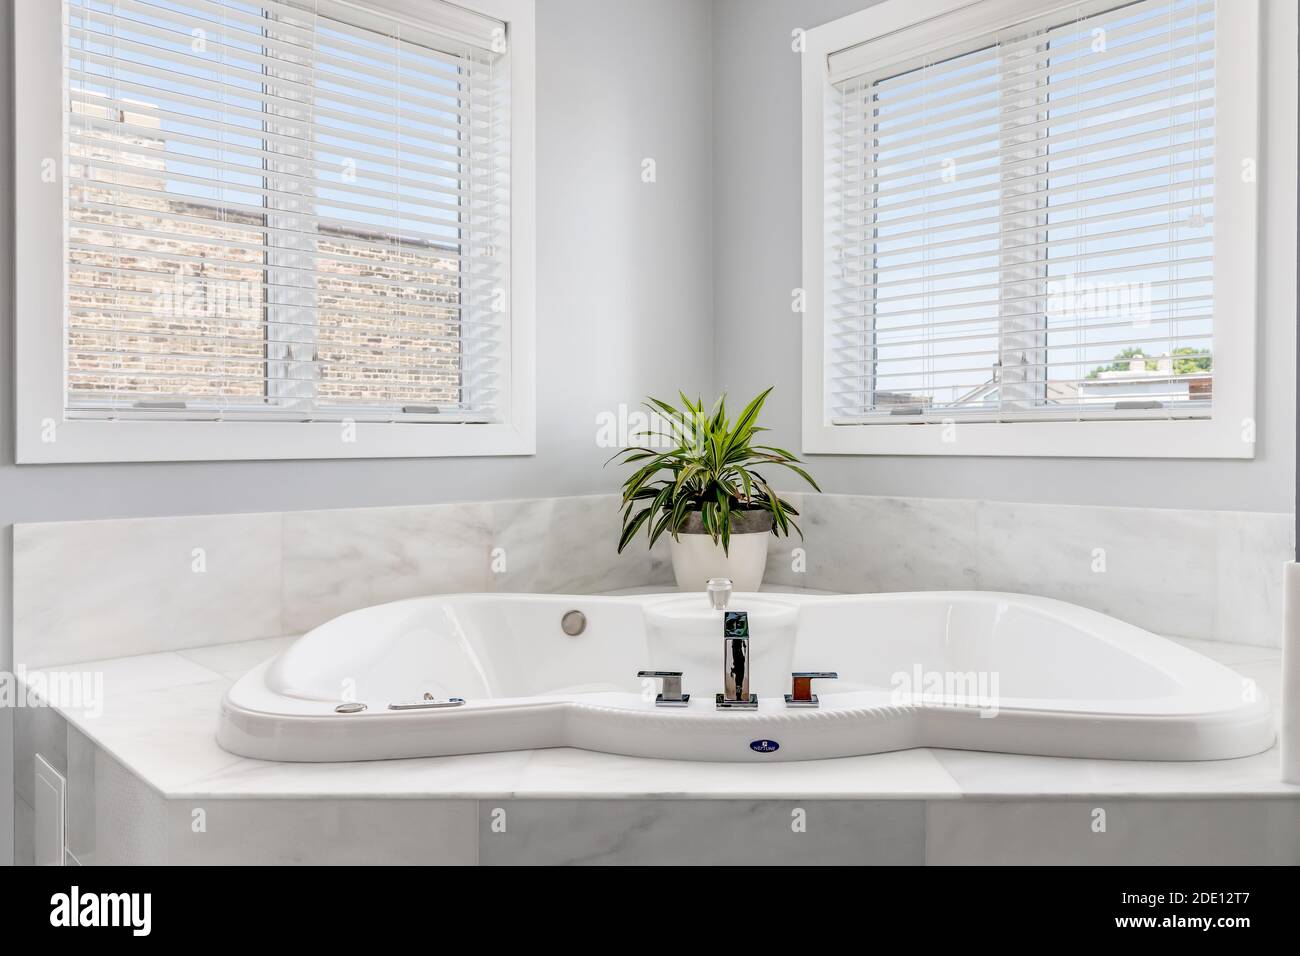 A jacuzzi tub in a luxury bathroom surrounded by windows and a plant sitting on the marble tile. Stock Photo